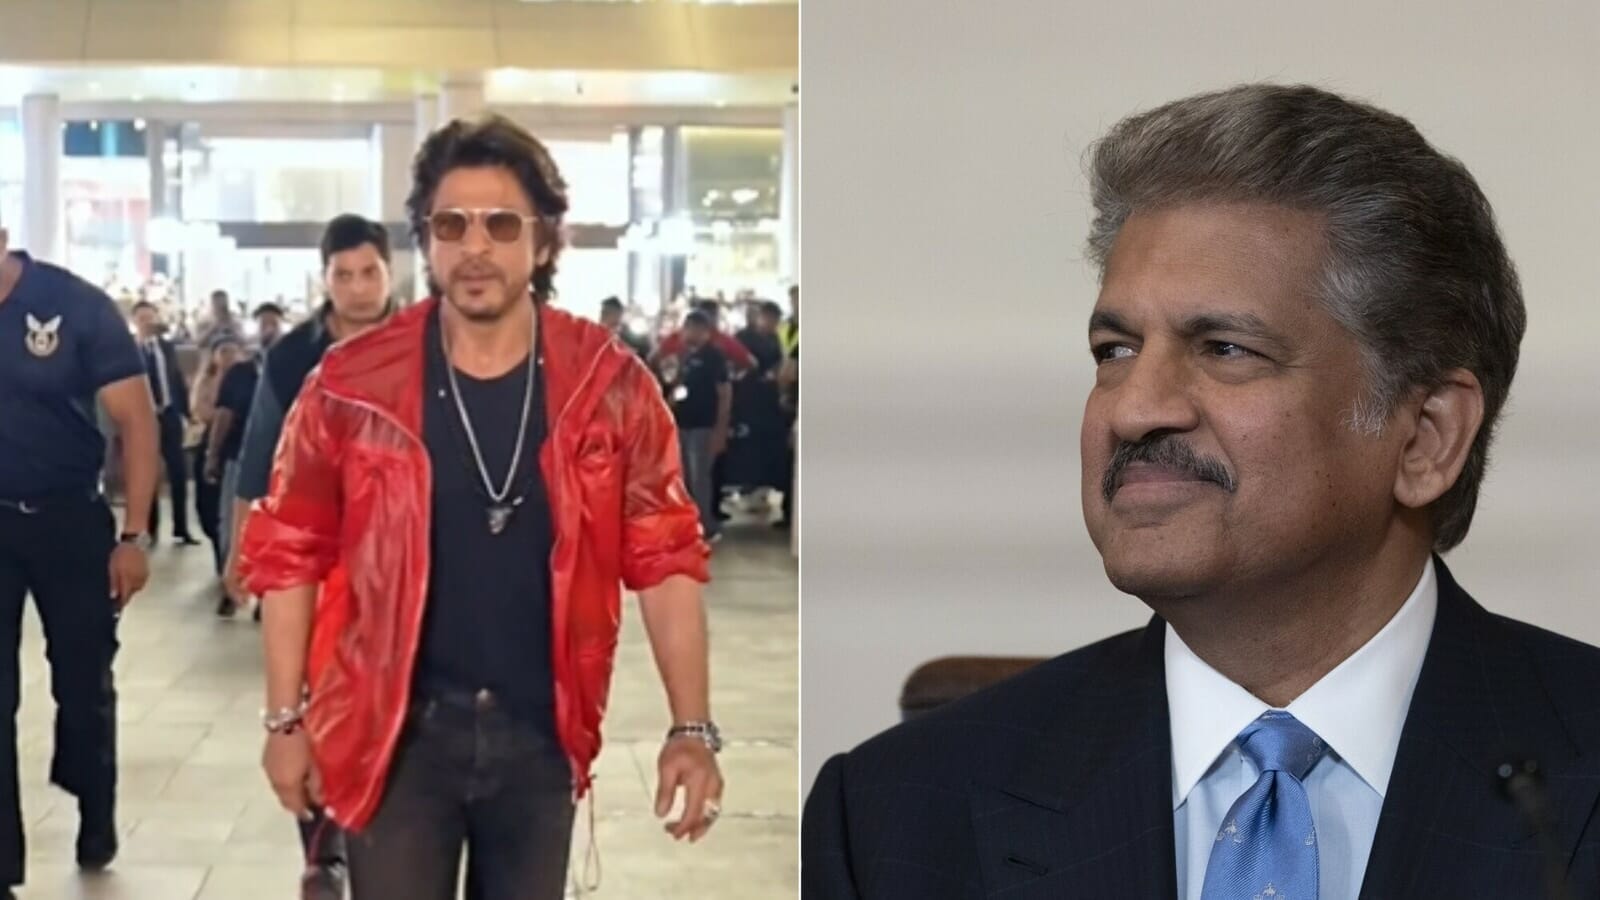 Shah Rukh Khan has the sweetest reaction to Anand Mahindra calling him a ‘natural resource’